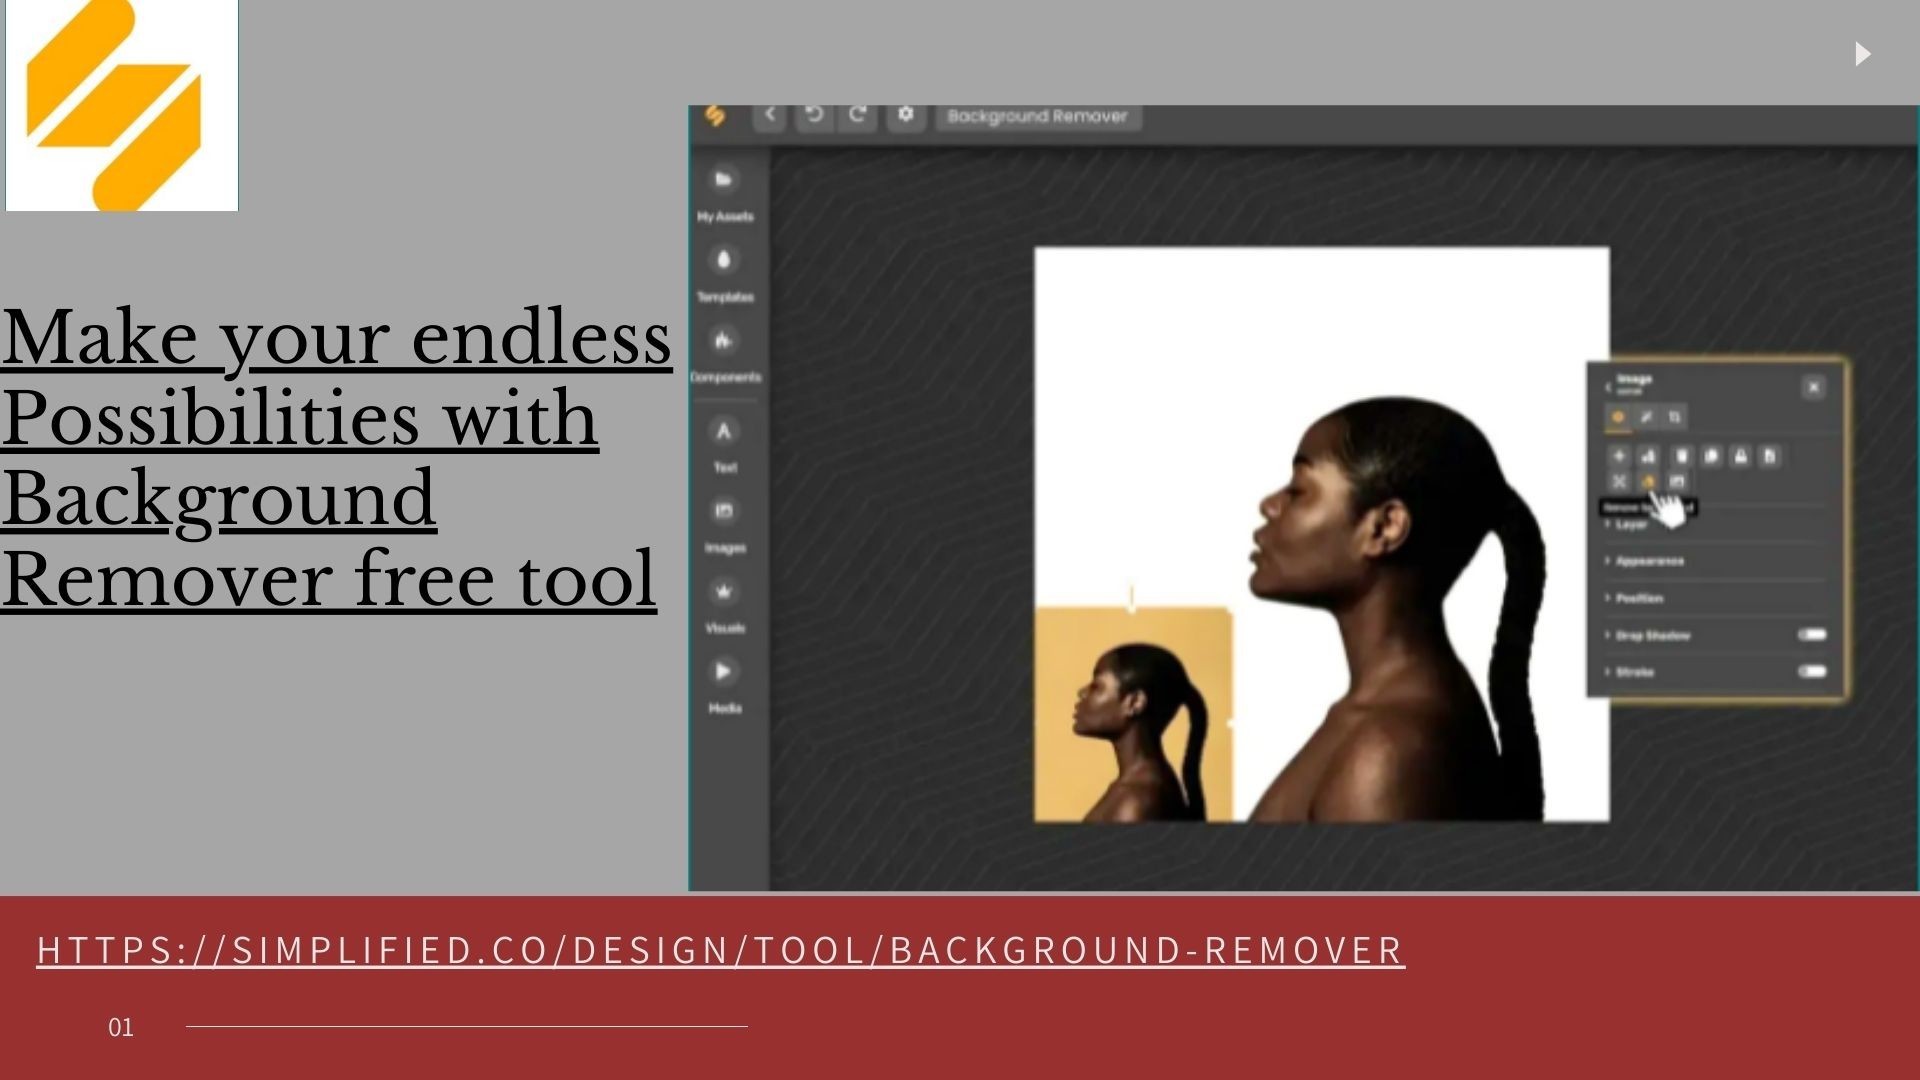 Make your endless Possibilities with Background Remover free tool